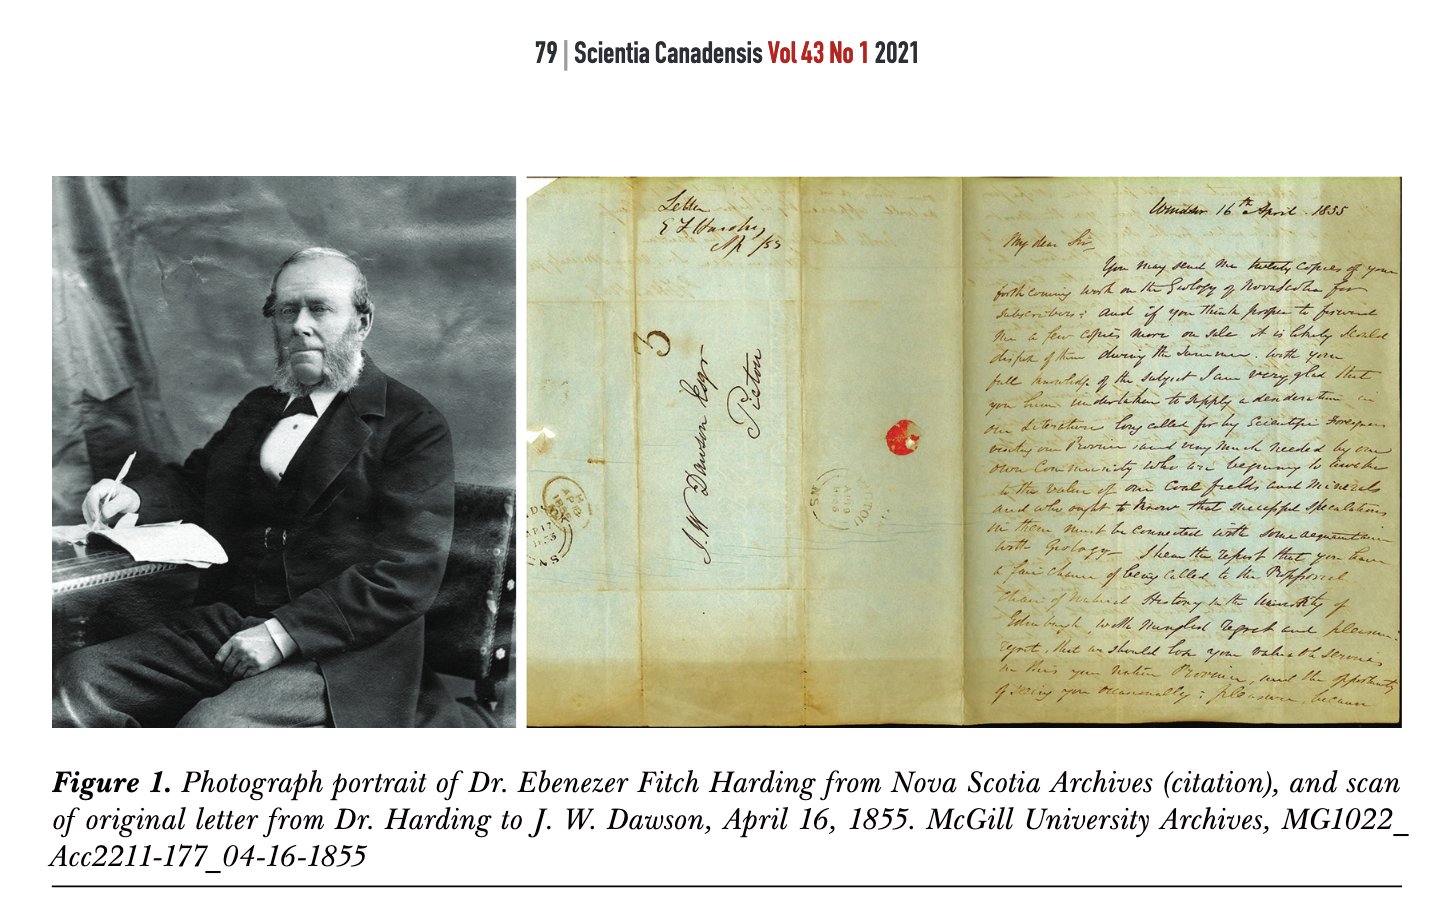 Photograph portrait of Dr. Ebenezer Fitch Harding from Nova Scotia Archives, and scan of original letter from Dr. Harding to J. W. Dawson, April 16, 1855. McGill University Archives, MG1022_ Acc2211-177_04-16-1855